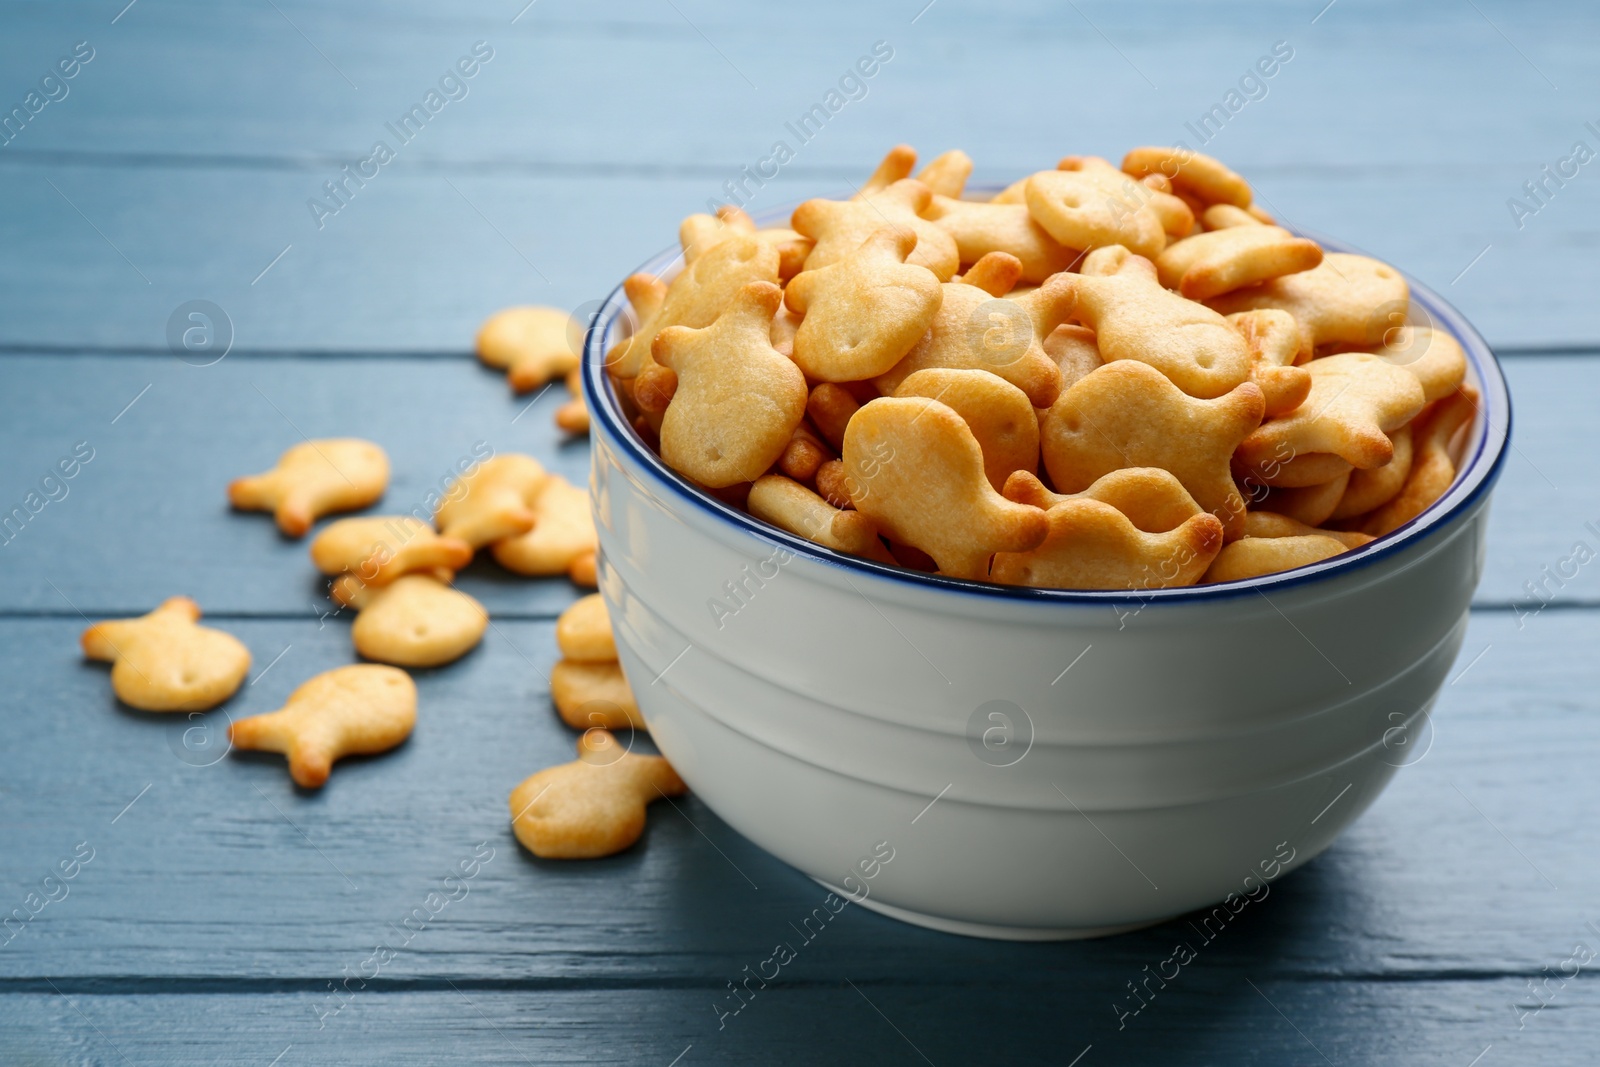 Photo of Delicious goldfish crackers in bowl on blue wooden table